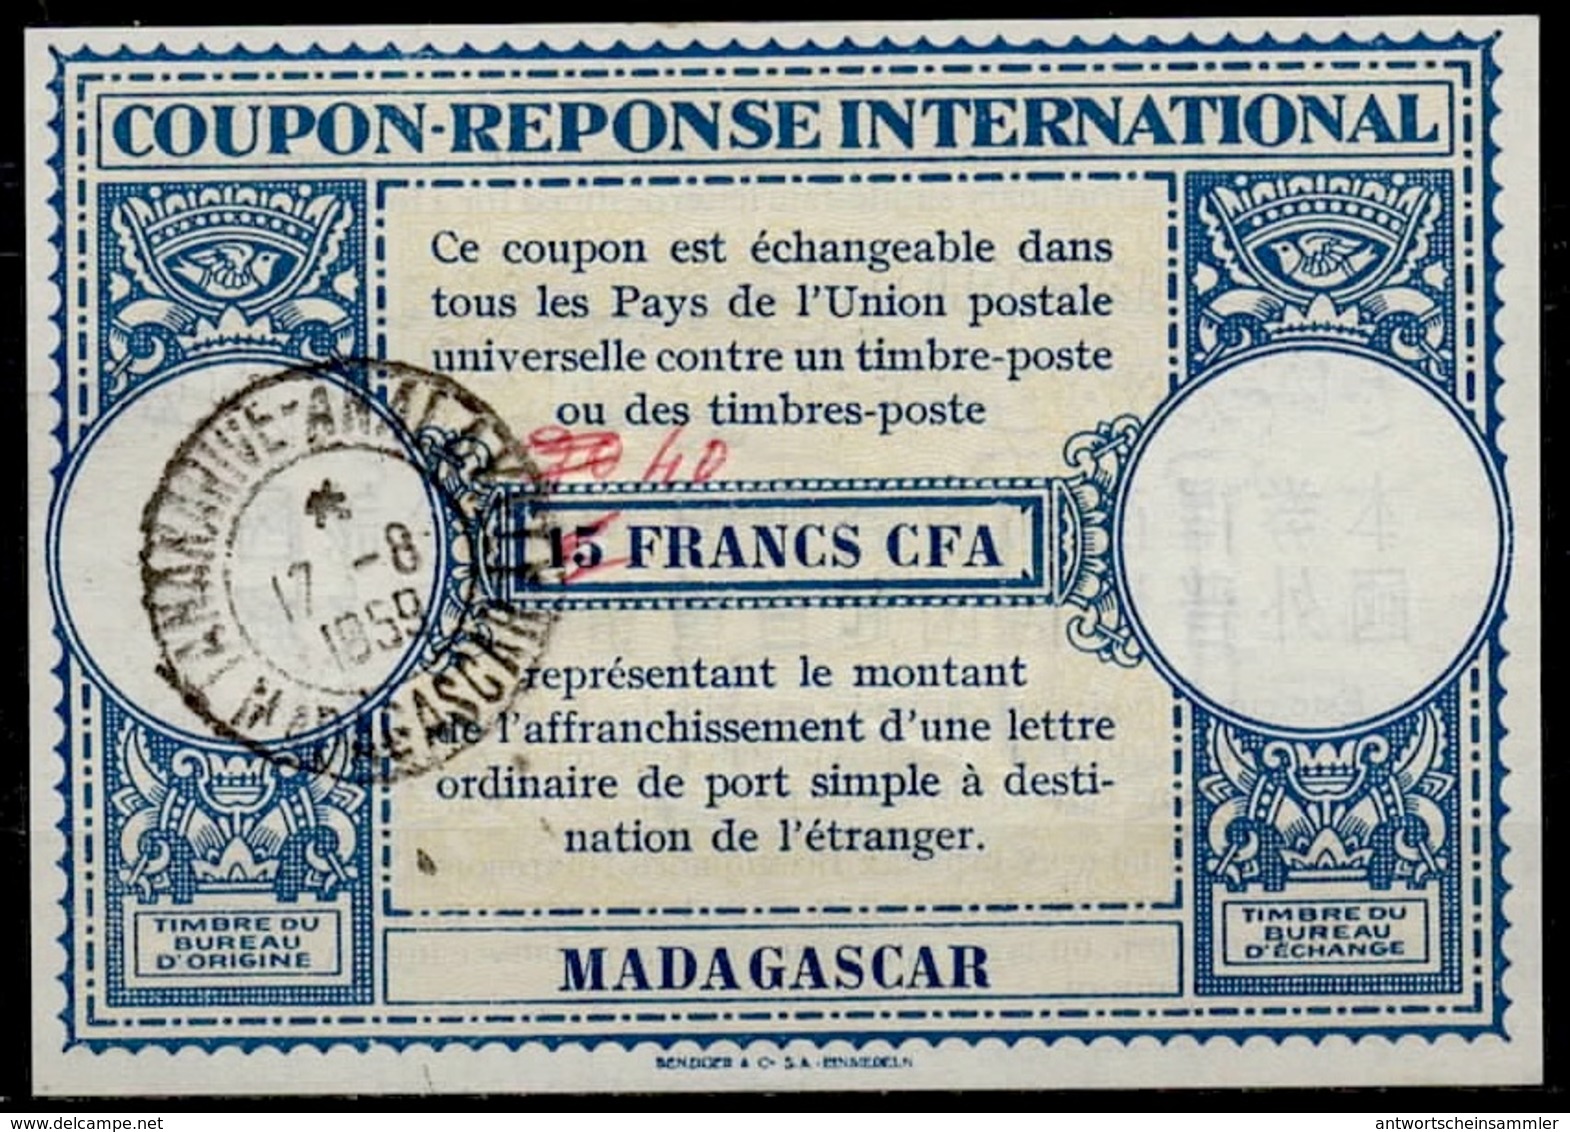 MADAGASCAR  Lo15  40 / 30 / 15 FRANCS CFA  International Reply Coupon Reponse IAS IRC Antwortschein O TANANARIVE 17.8.59 - Lettres & Documents